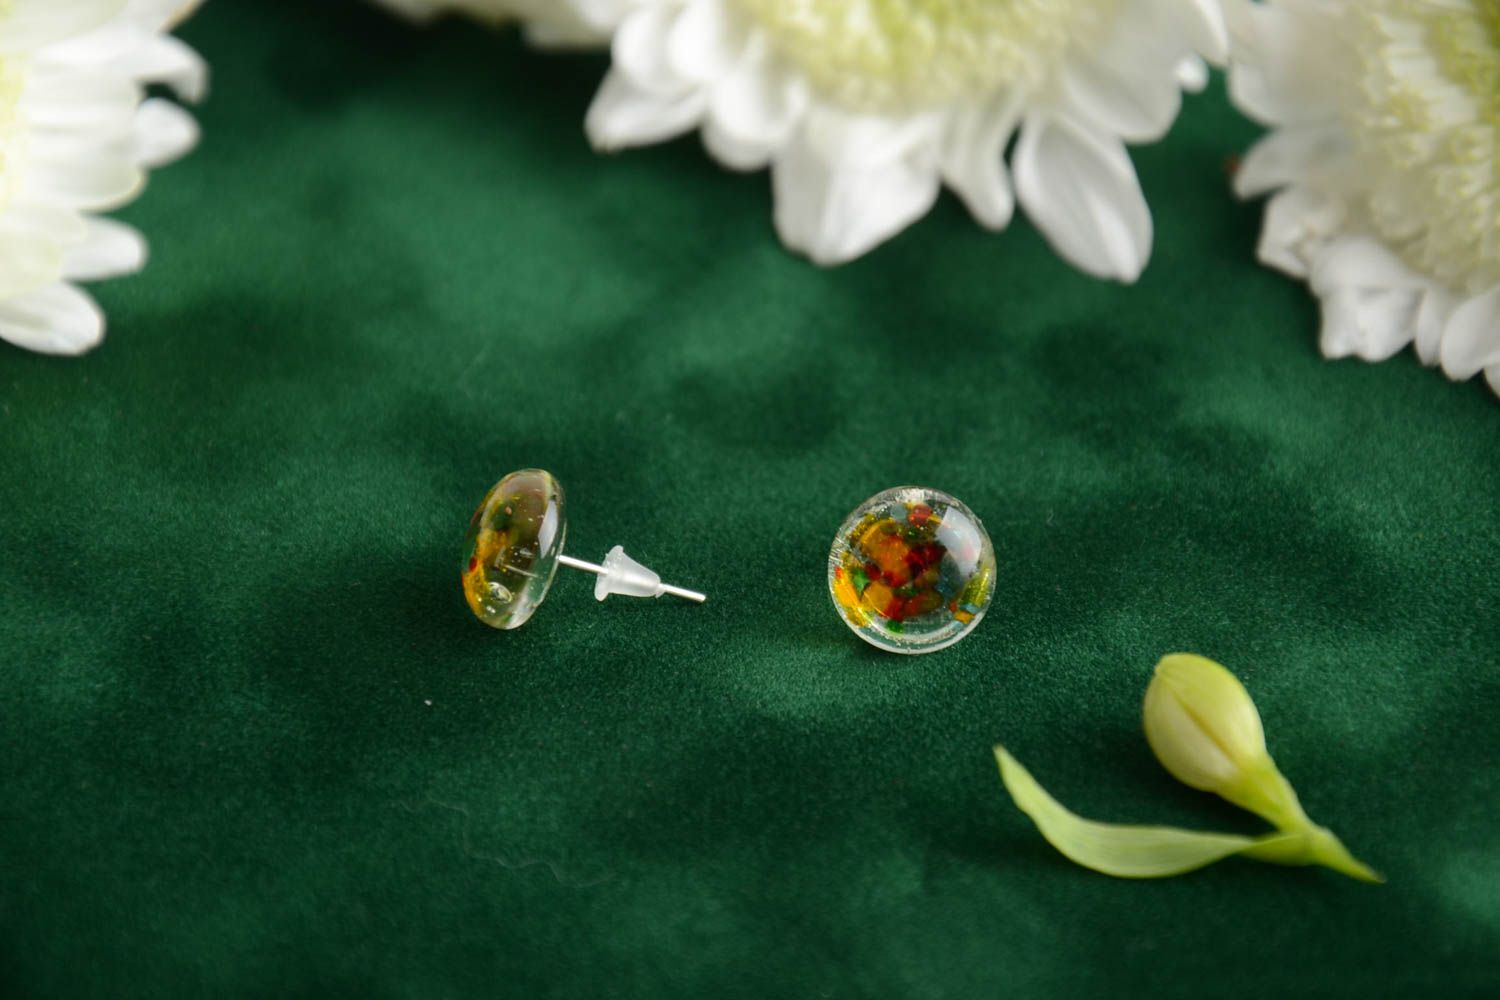 Small round earrings made of glass beautiful women accessory for every day photo 1